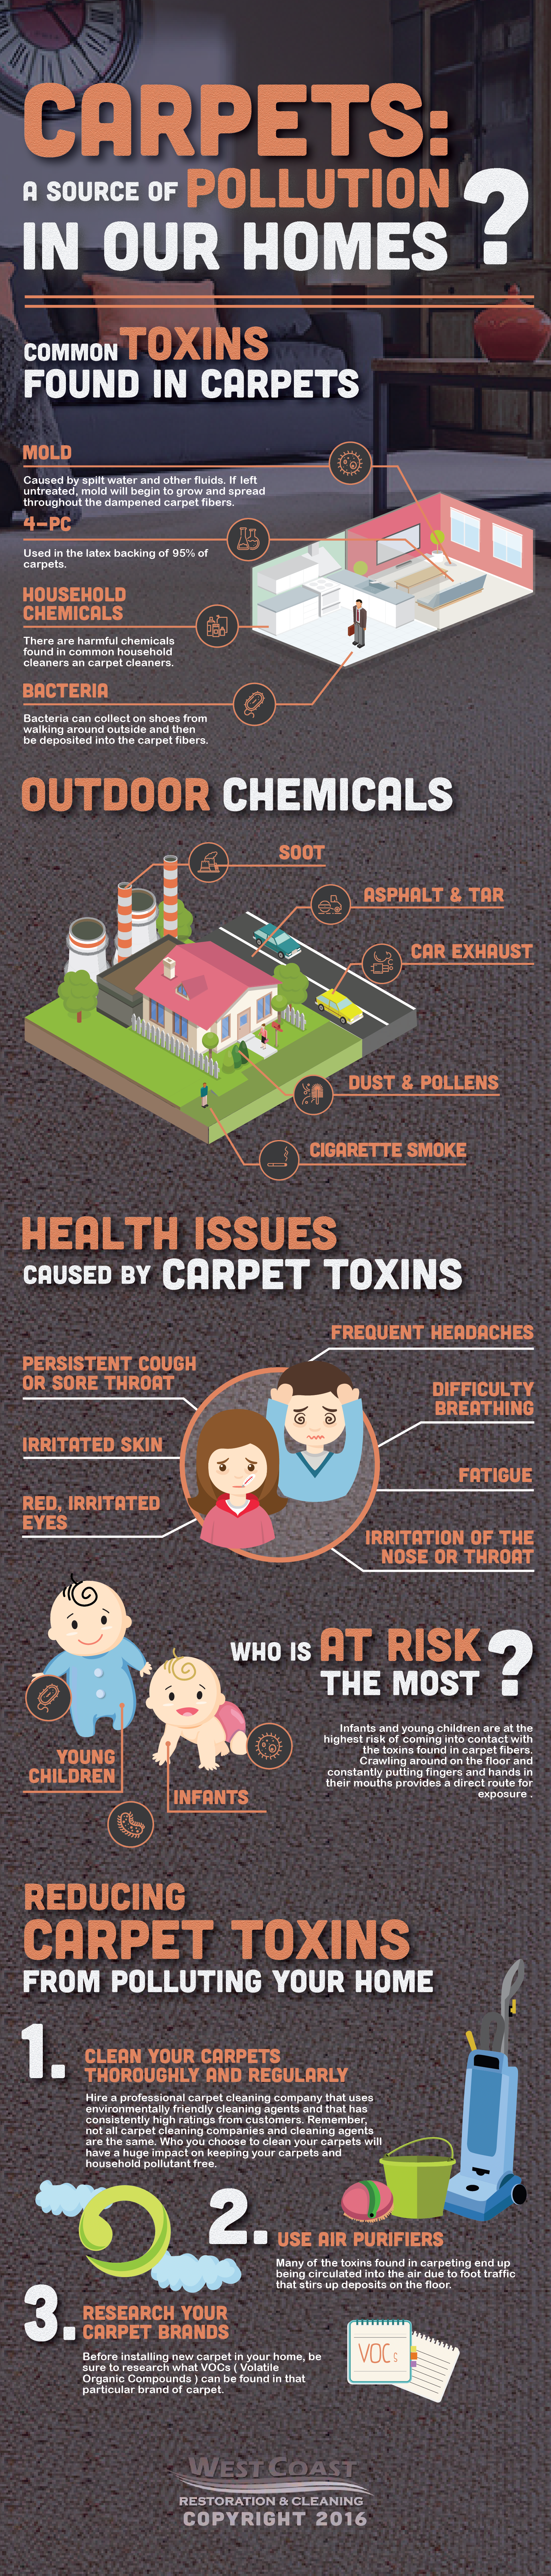 Carpets: A Source of Pollution in Our Homes?